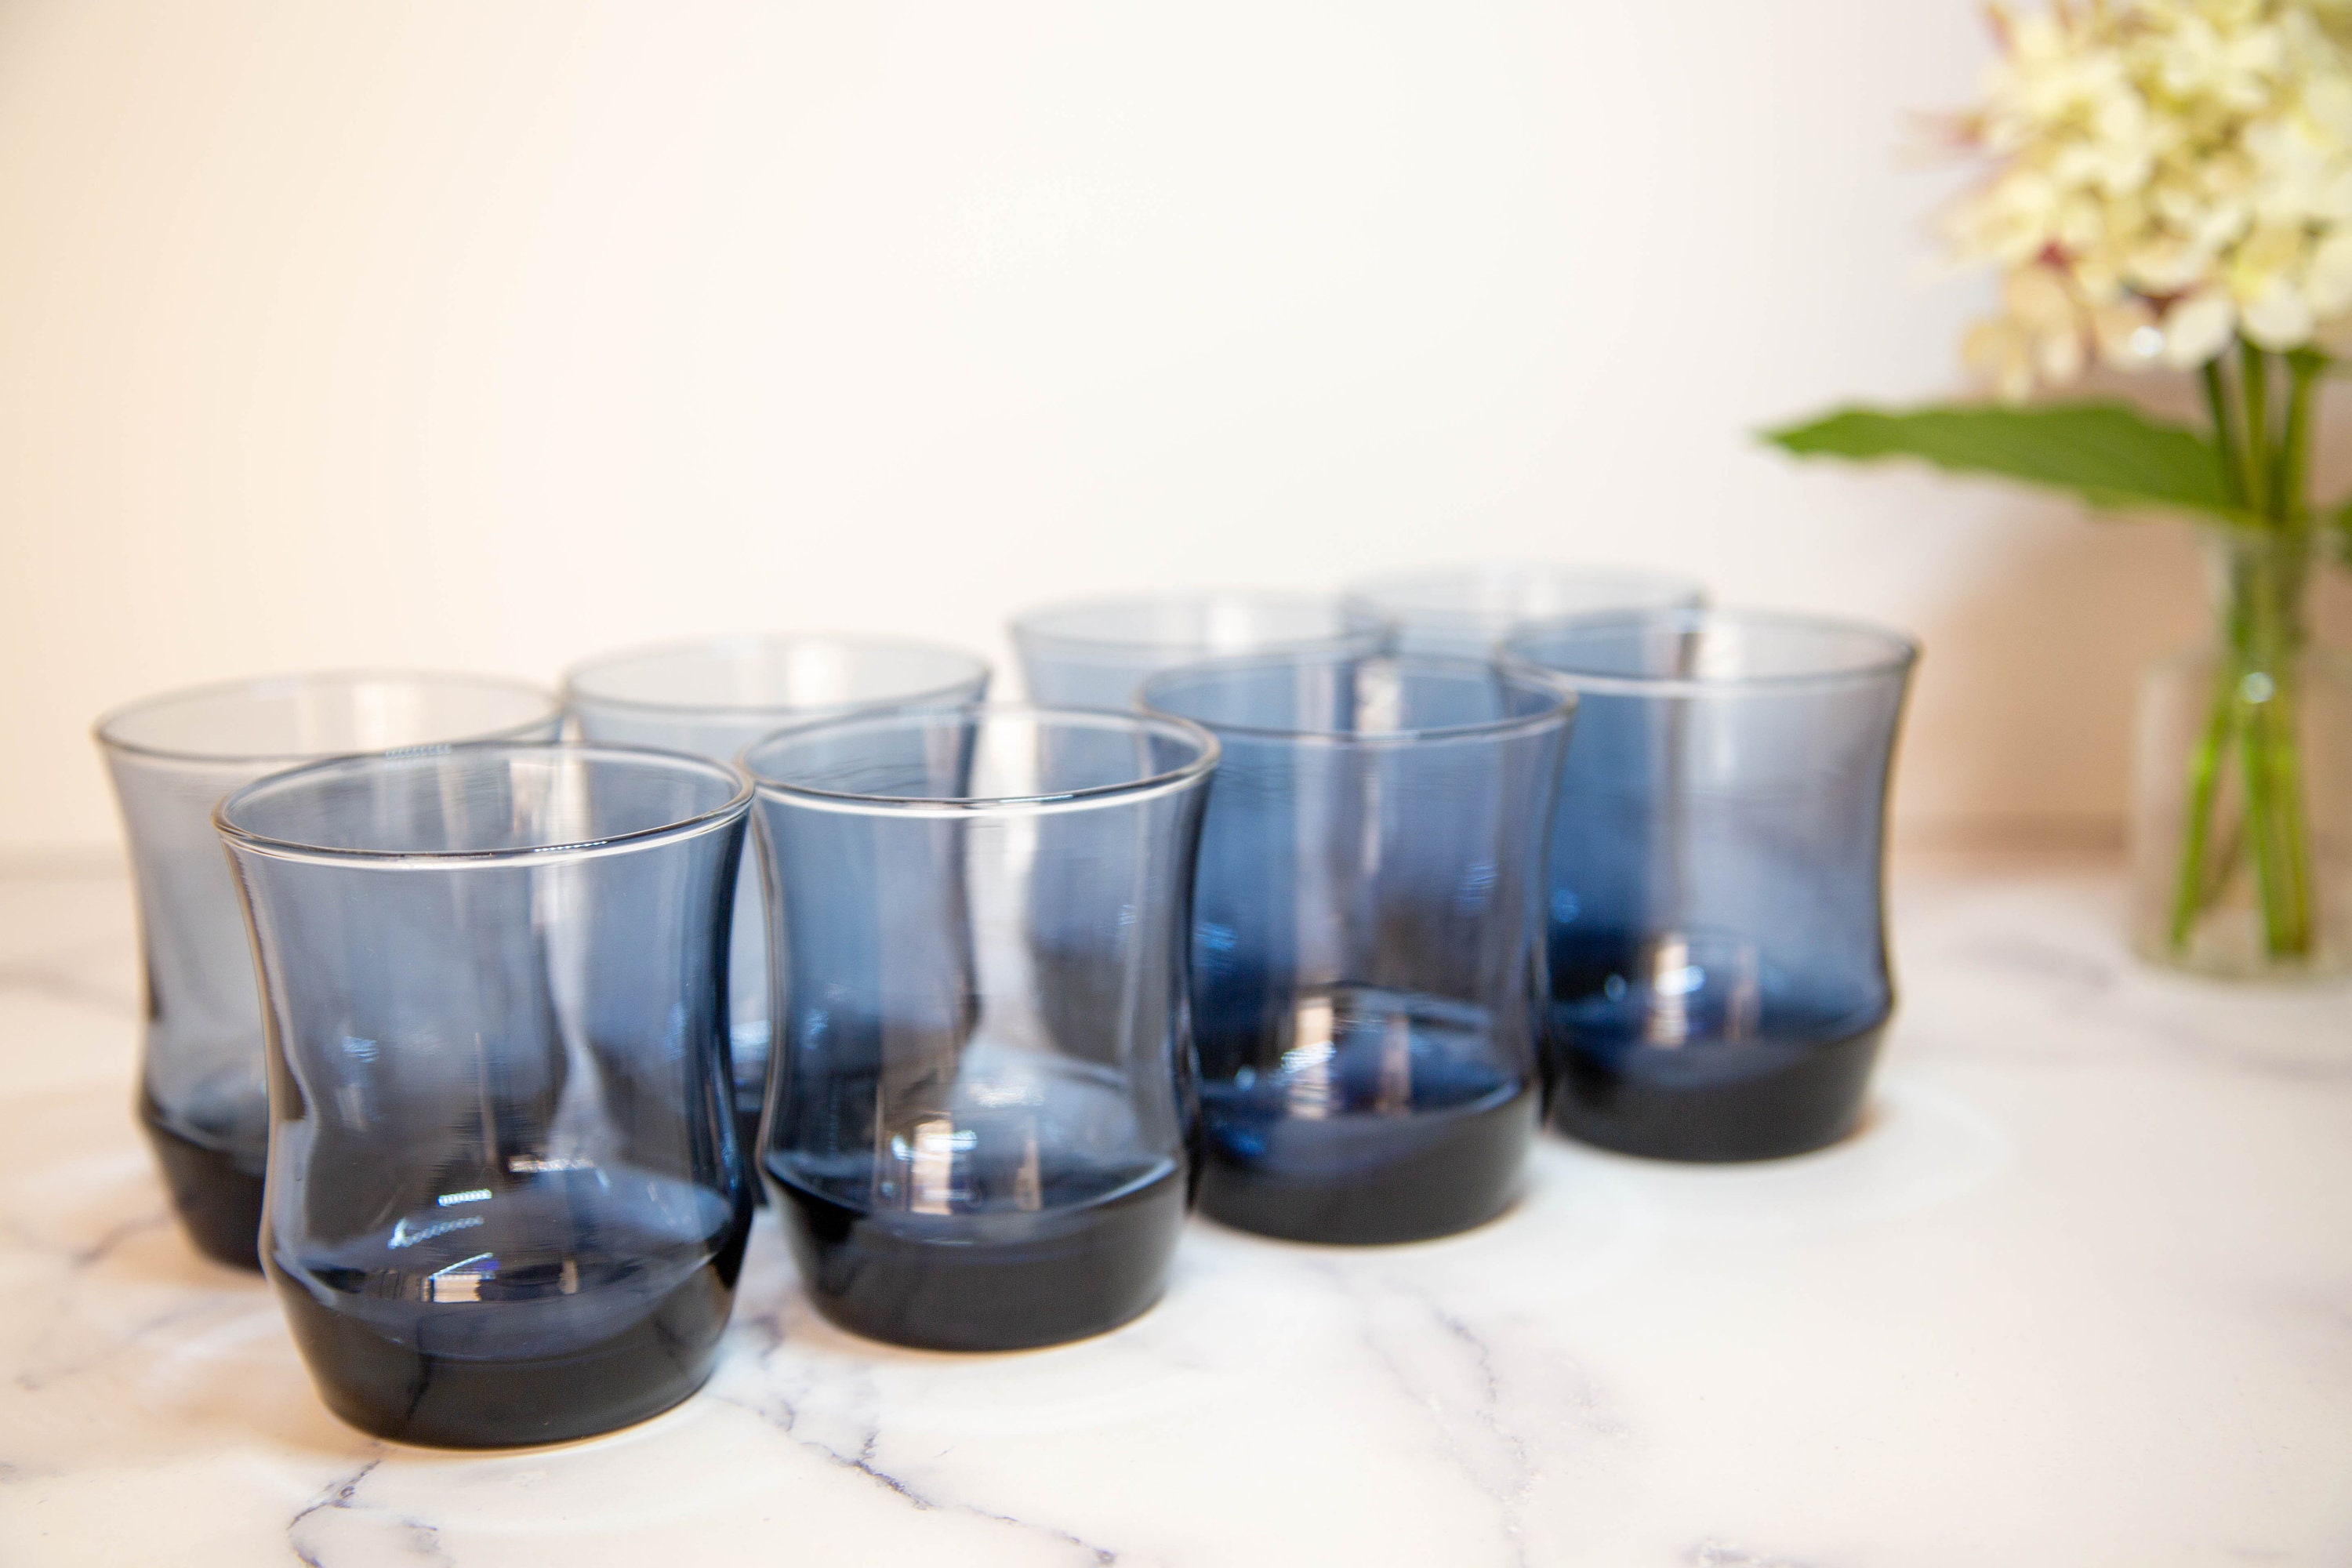 Stylish Tribal Totem Cocktail Cups - Glass - 7 Patterns from Apollo Box